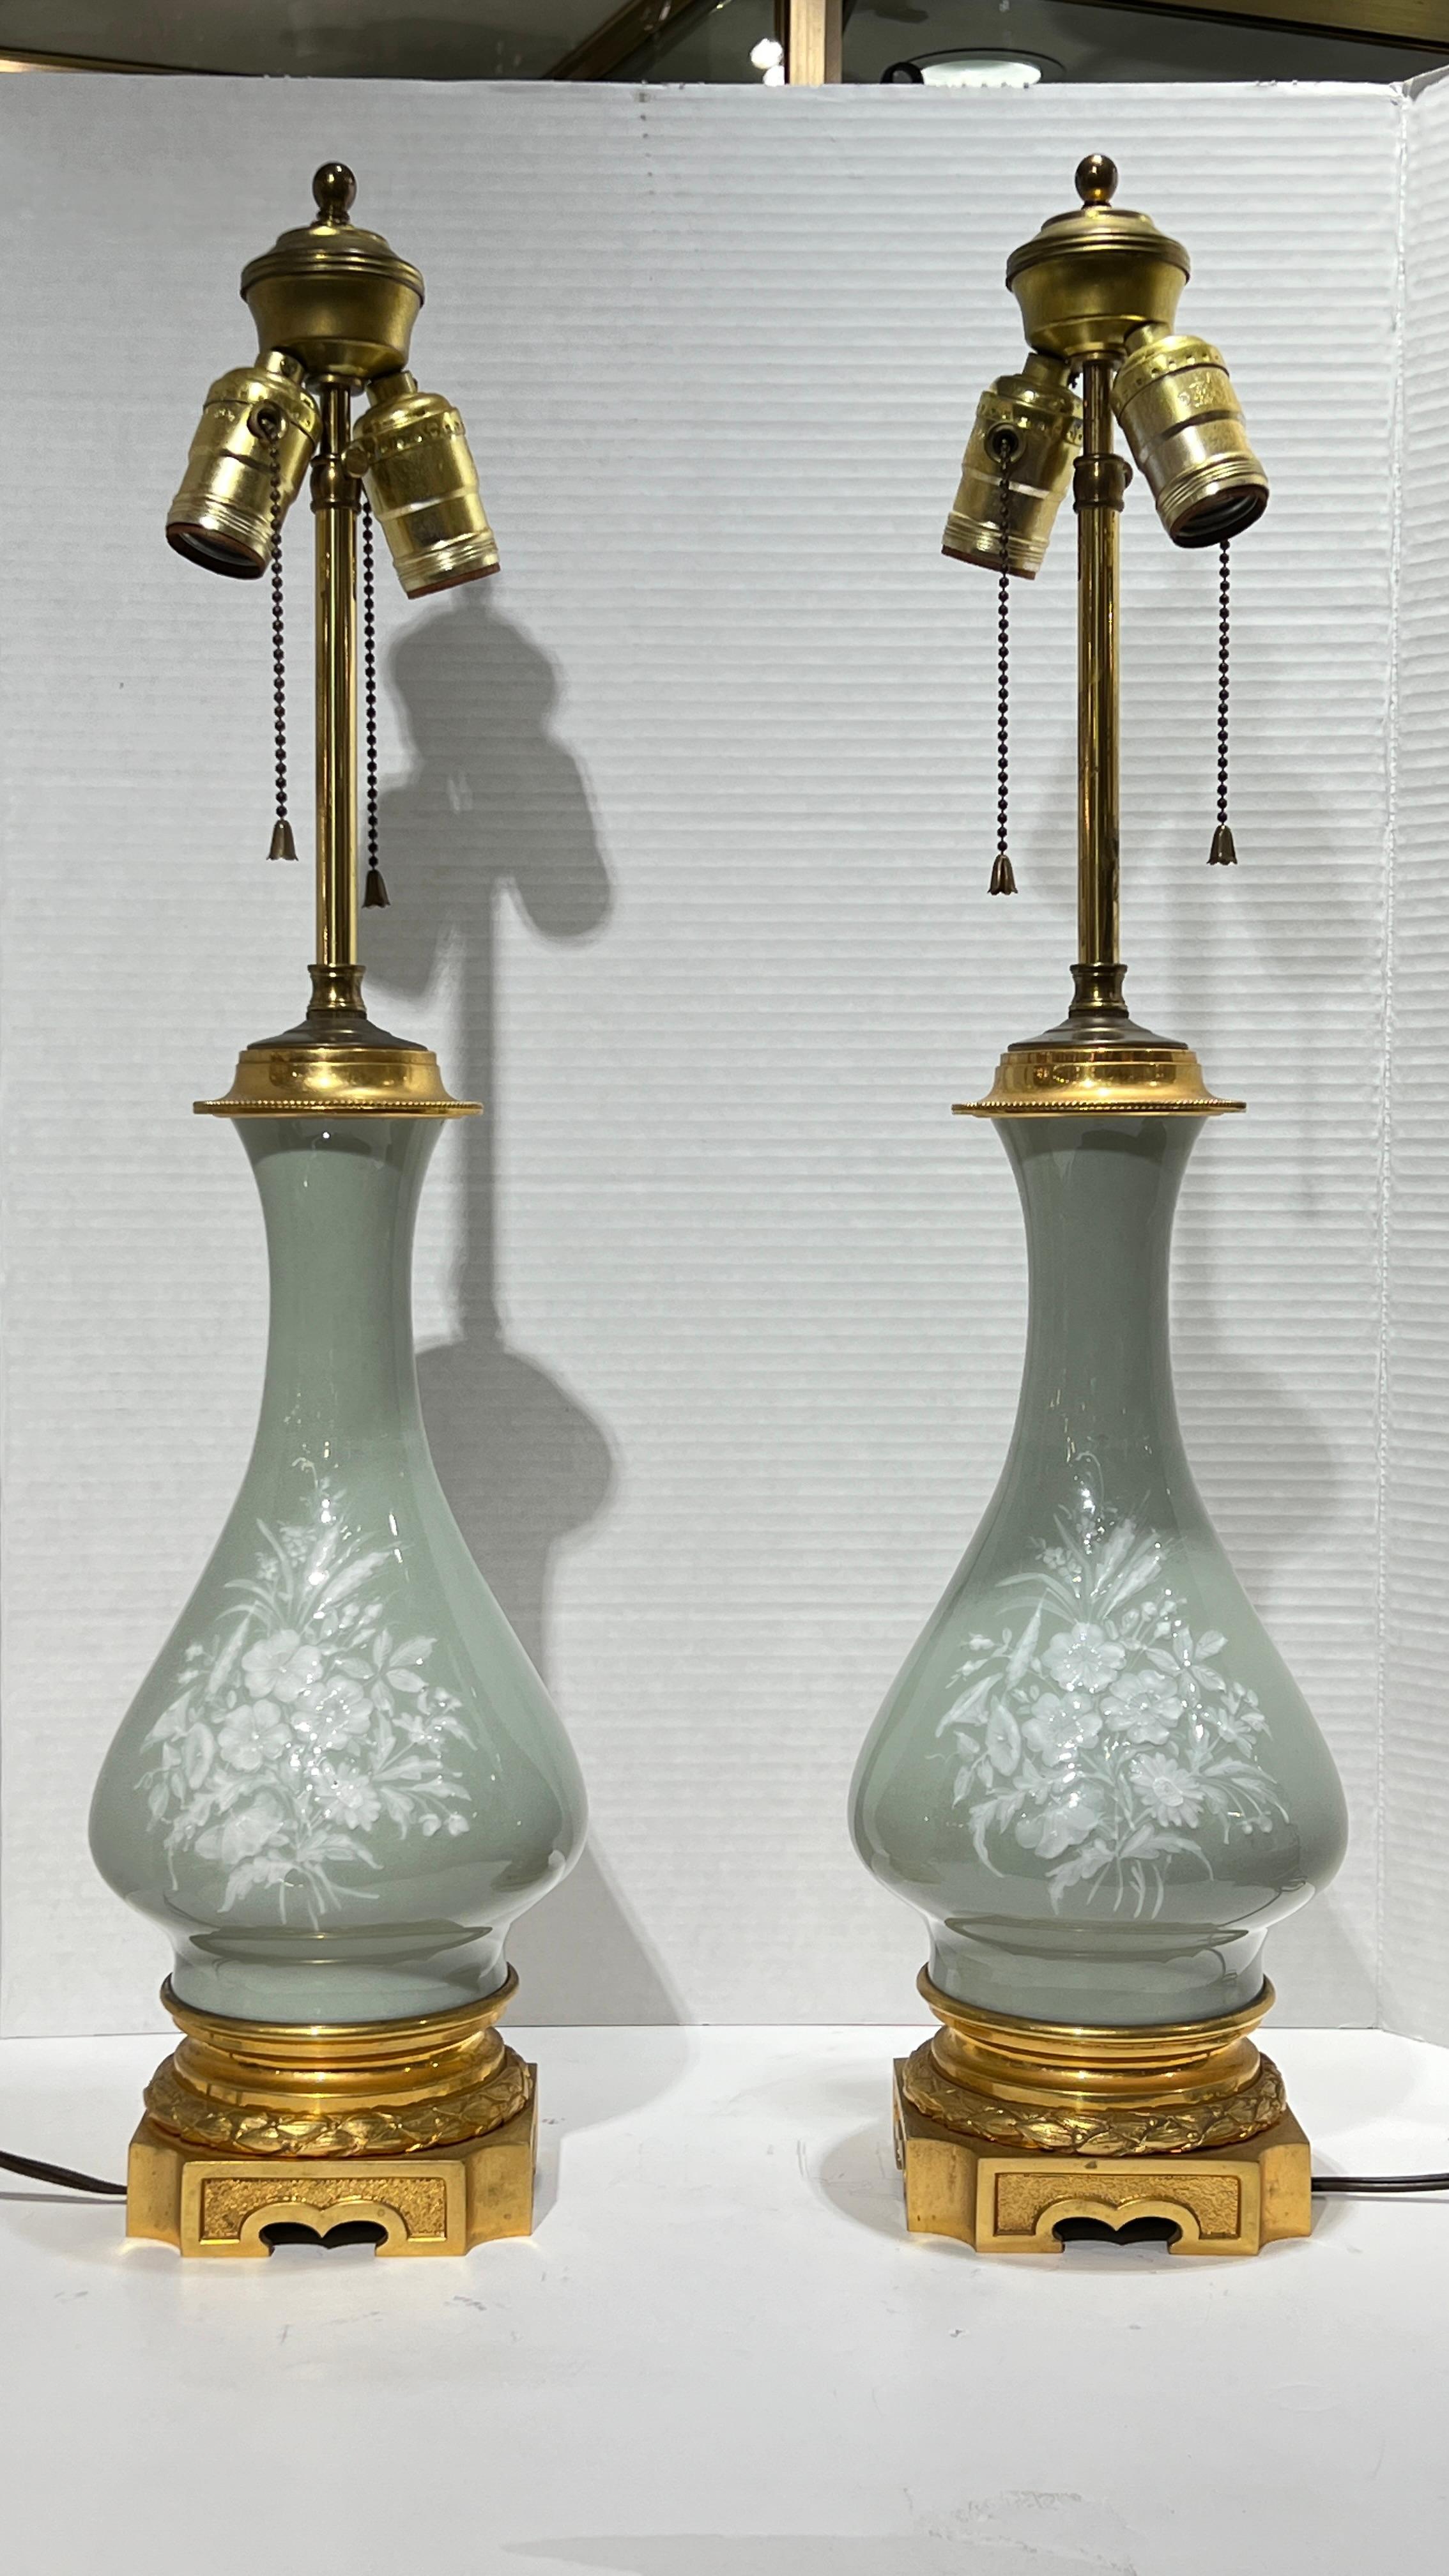 Pair of French 19 century celadon green porcelain vases with white floral pate-sur-pate designs, mounted on gilt bronze pedestals with sockets and wiring added.